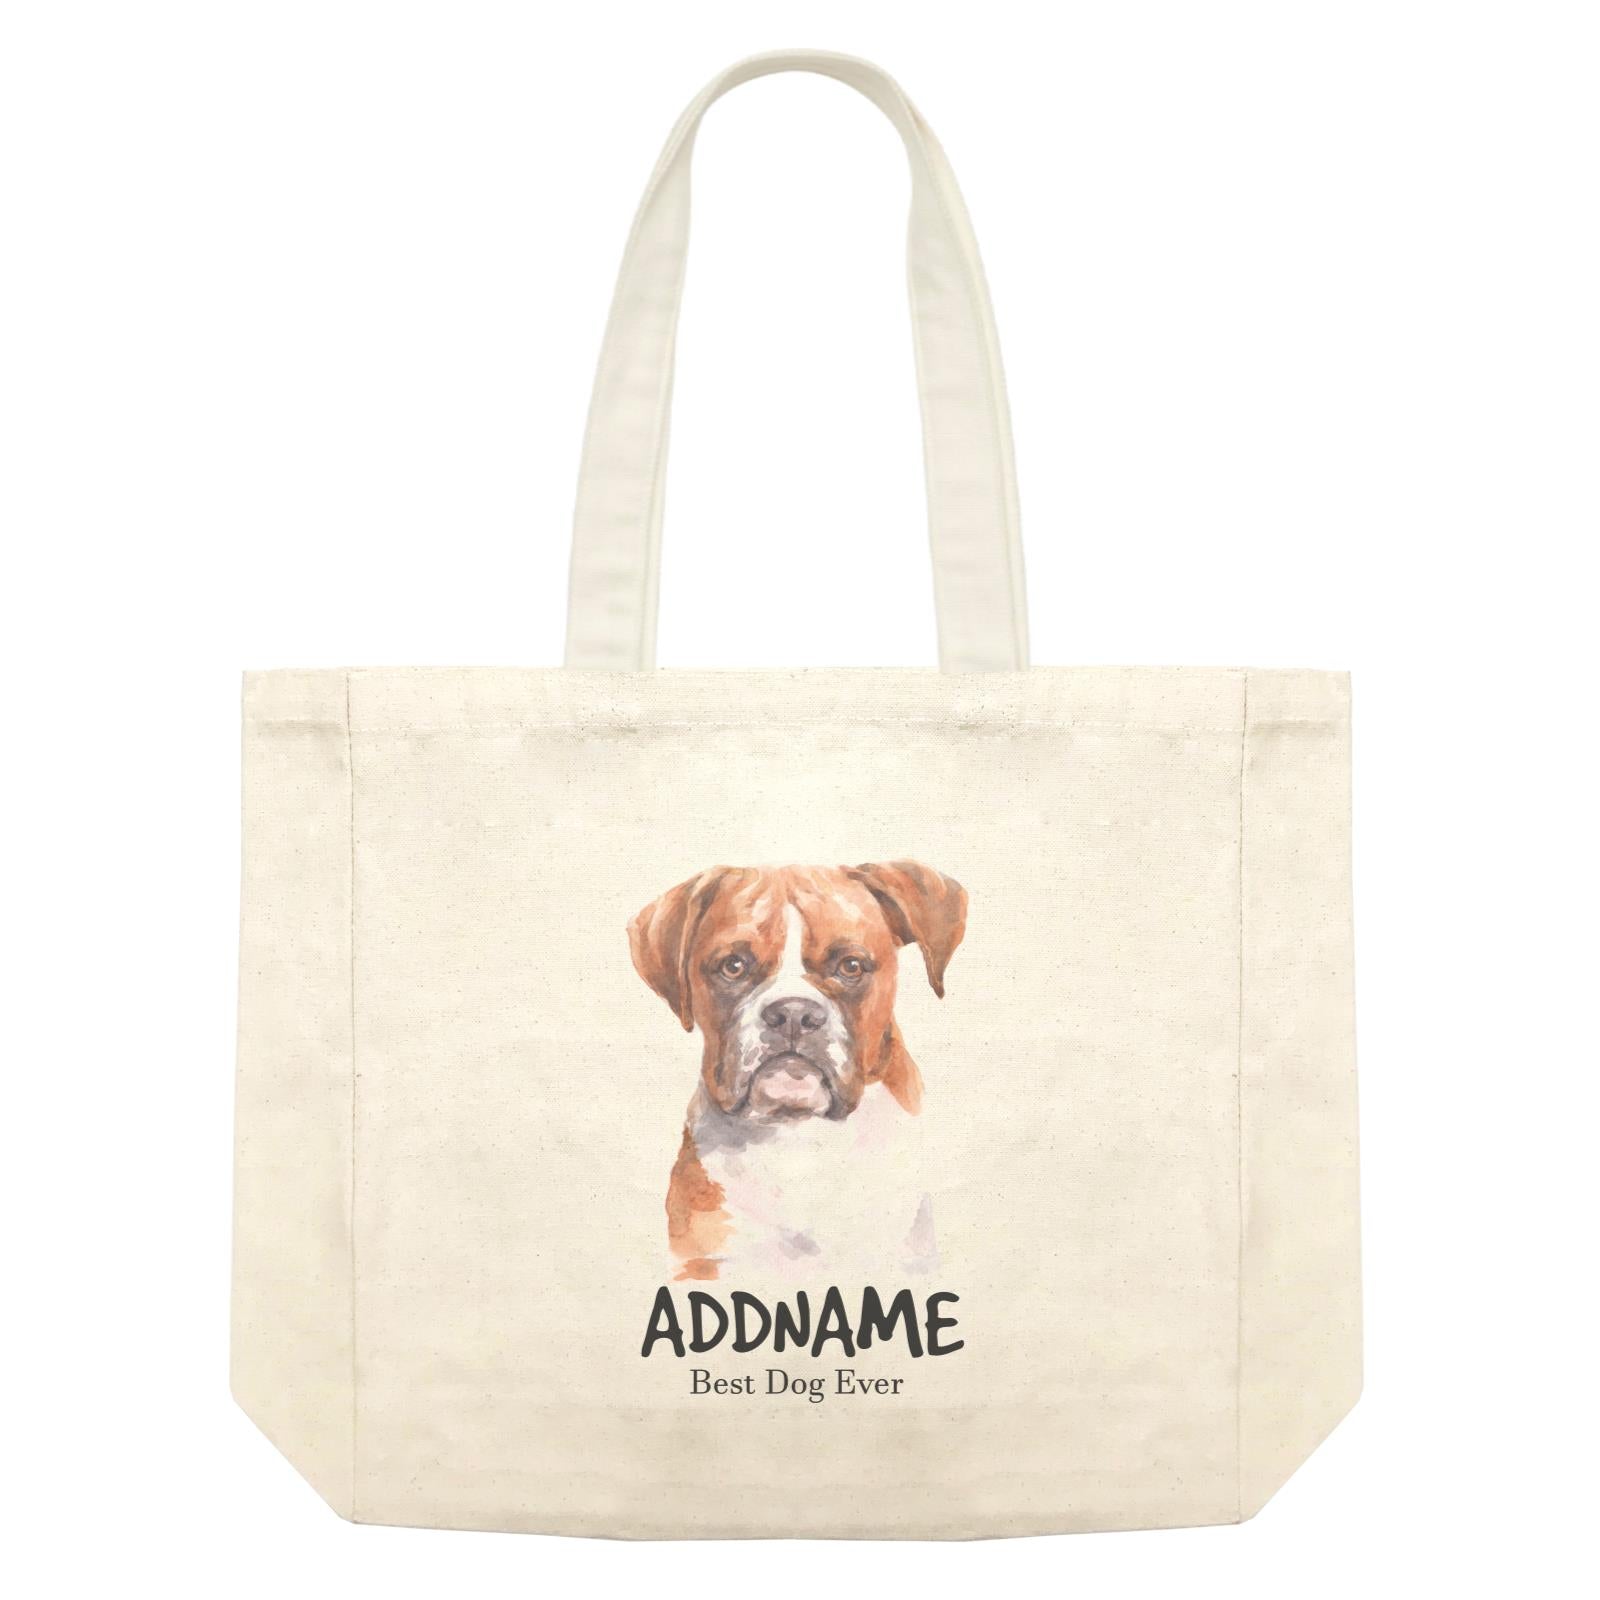 Watercolor Dog Boxer Brown Ears Best Dog Ever Addname Shopping Bag